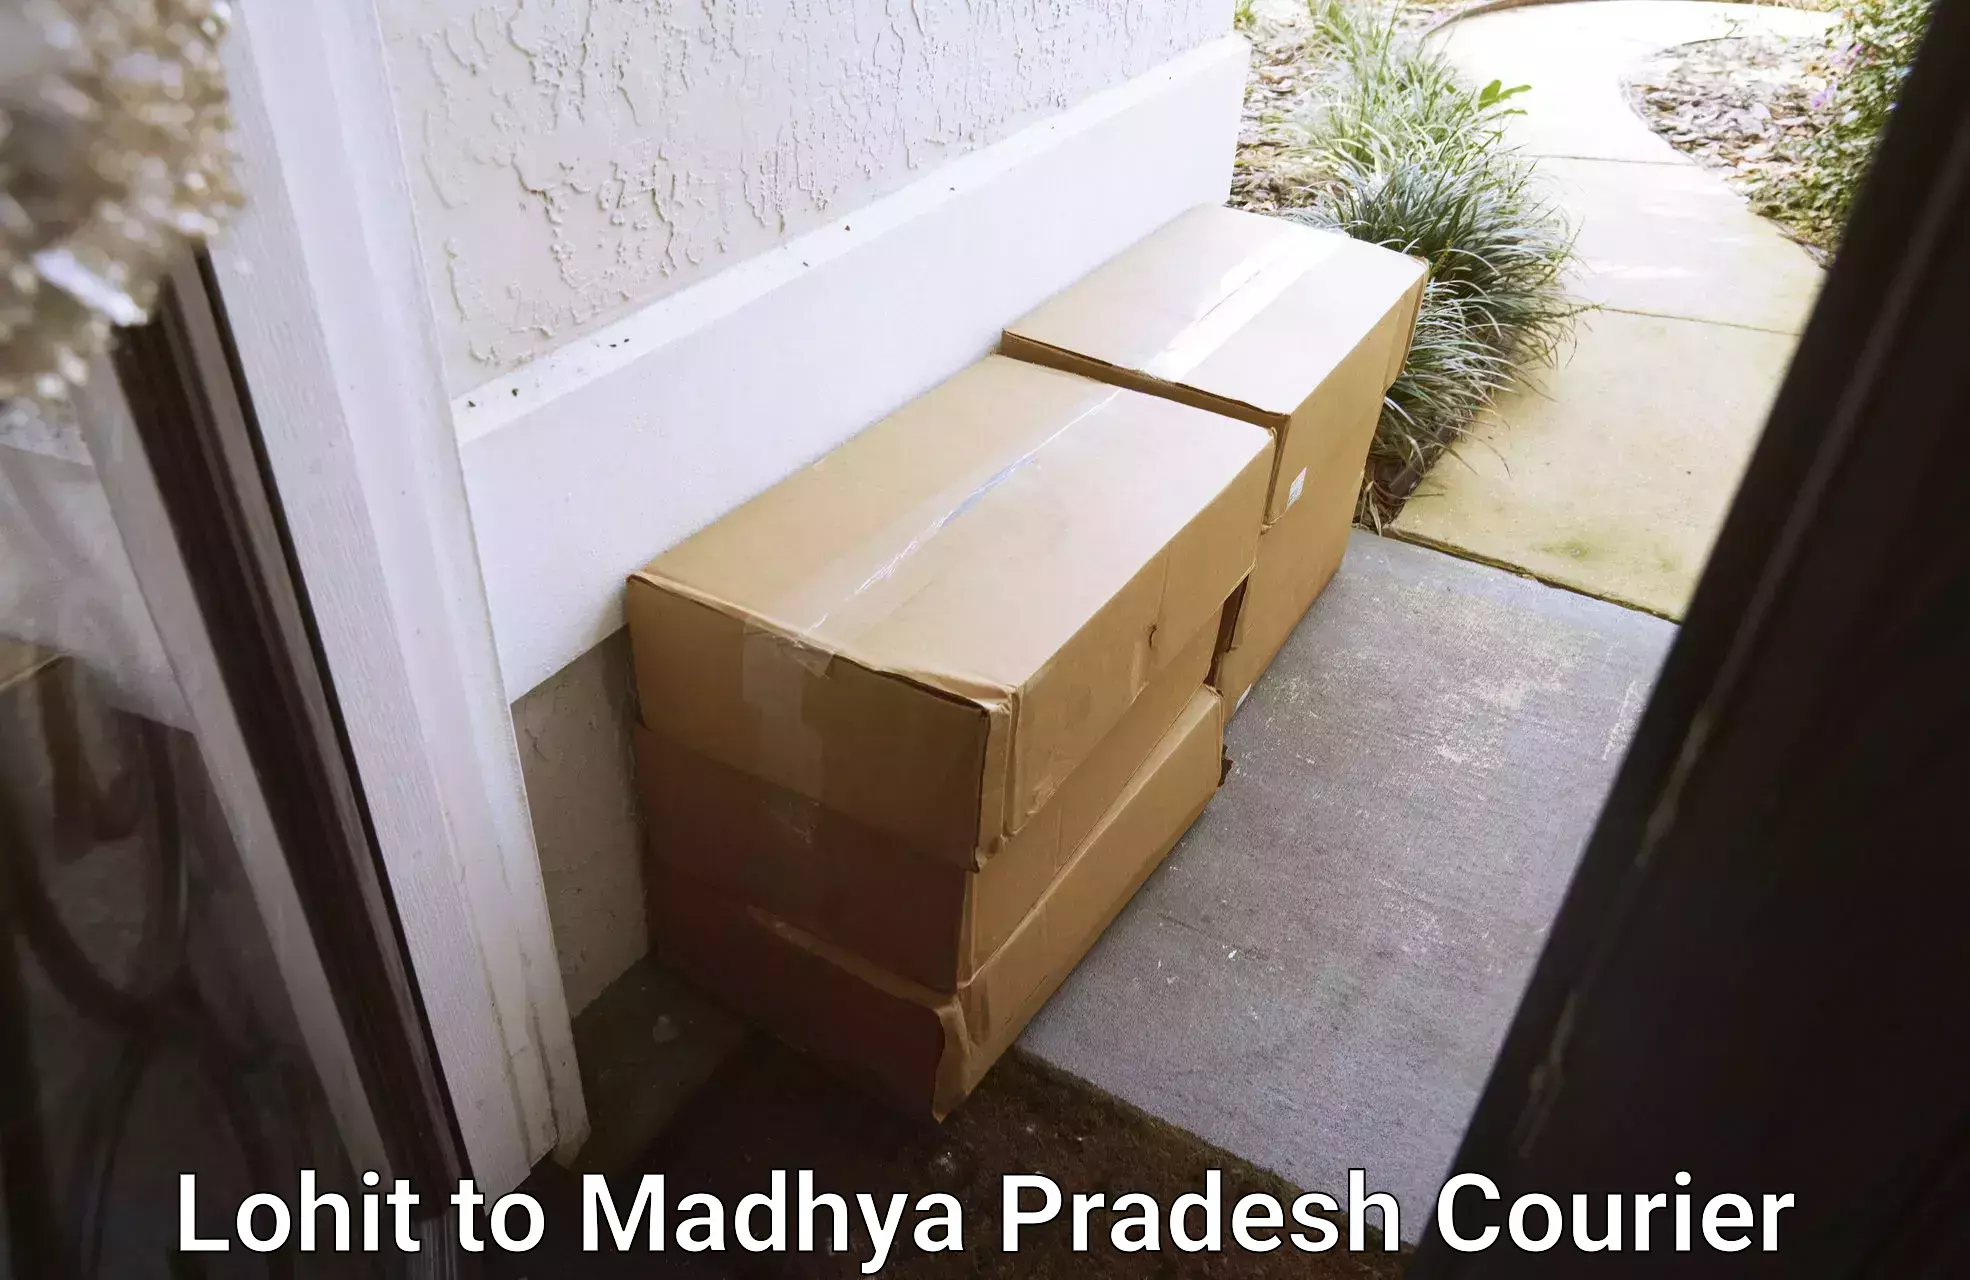 Sustainable delivery practices Lohit to Madhya Pradesh